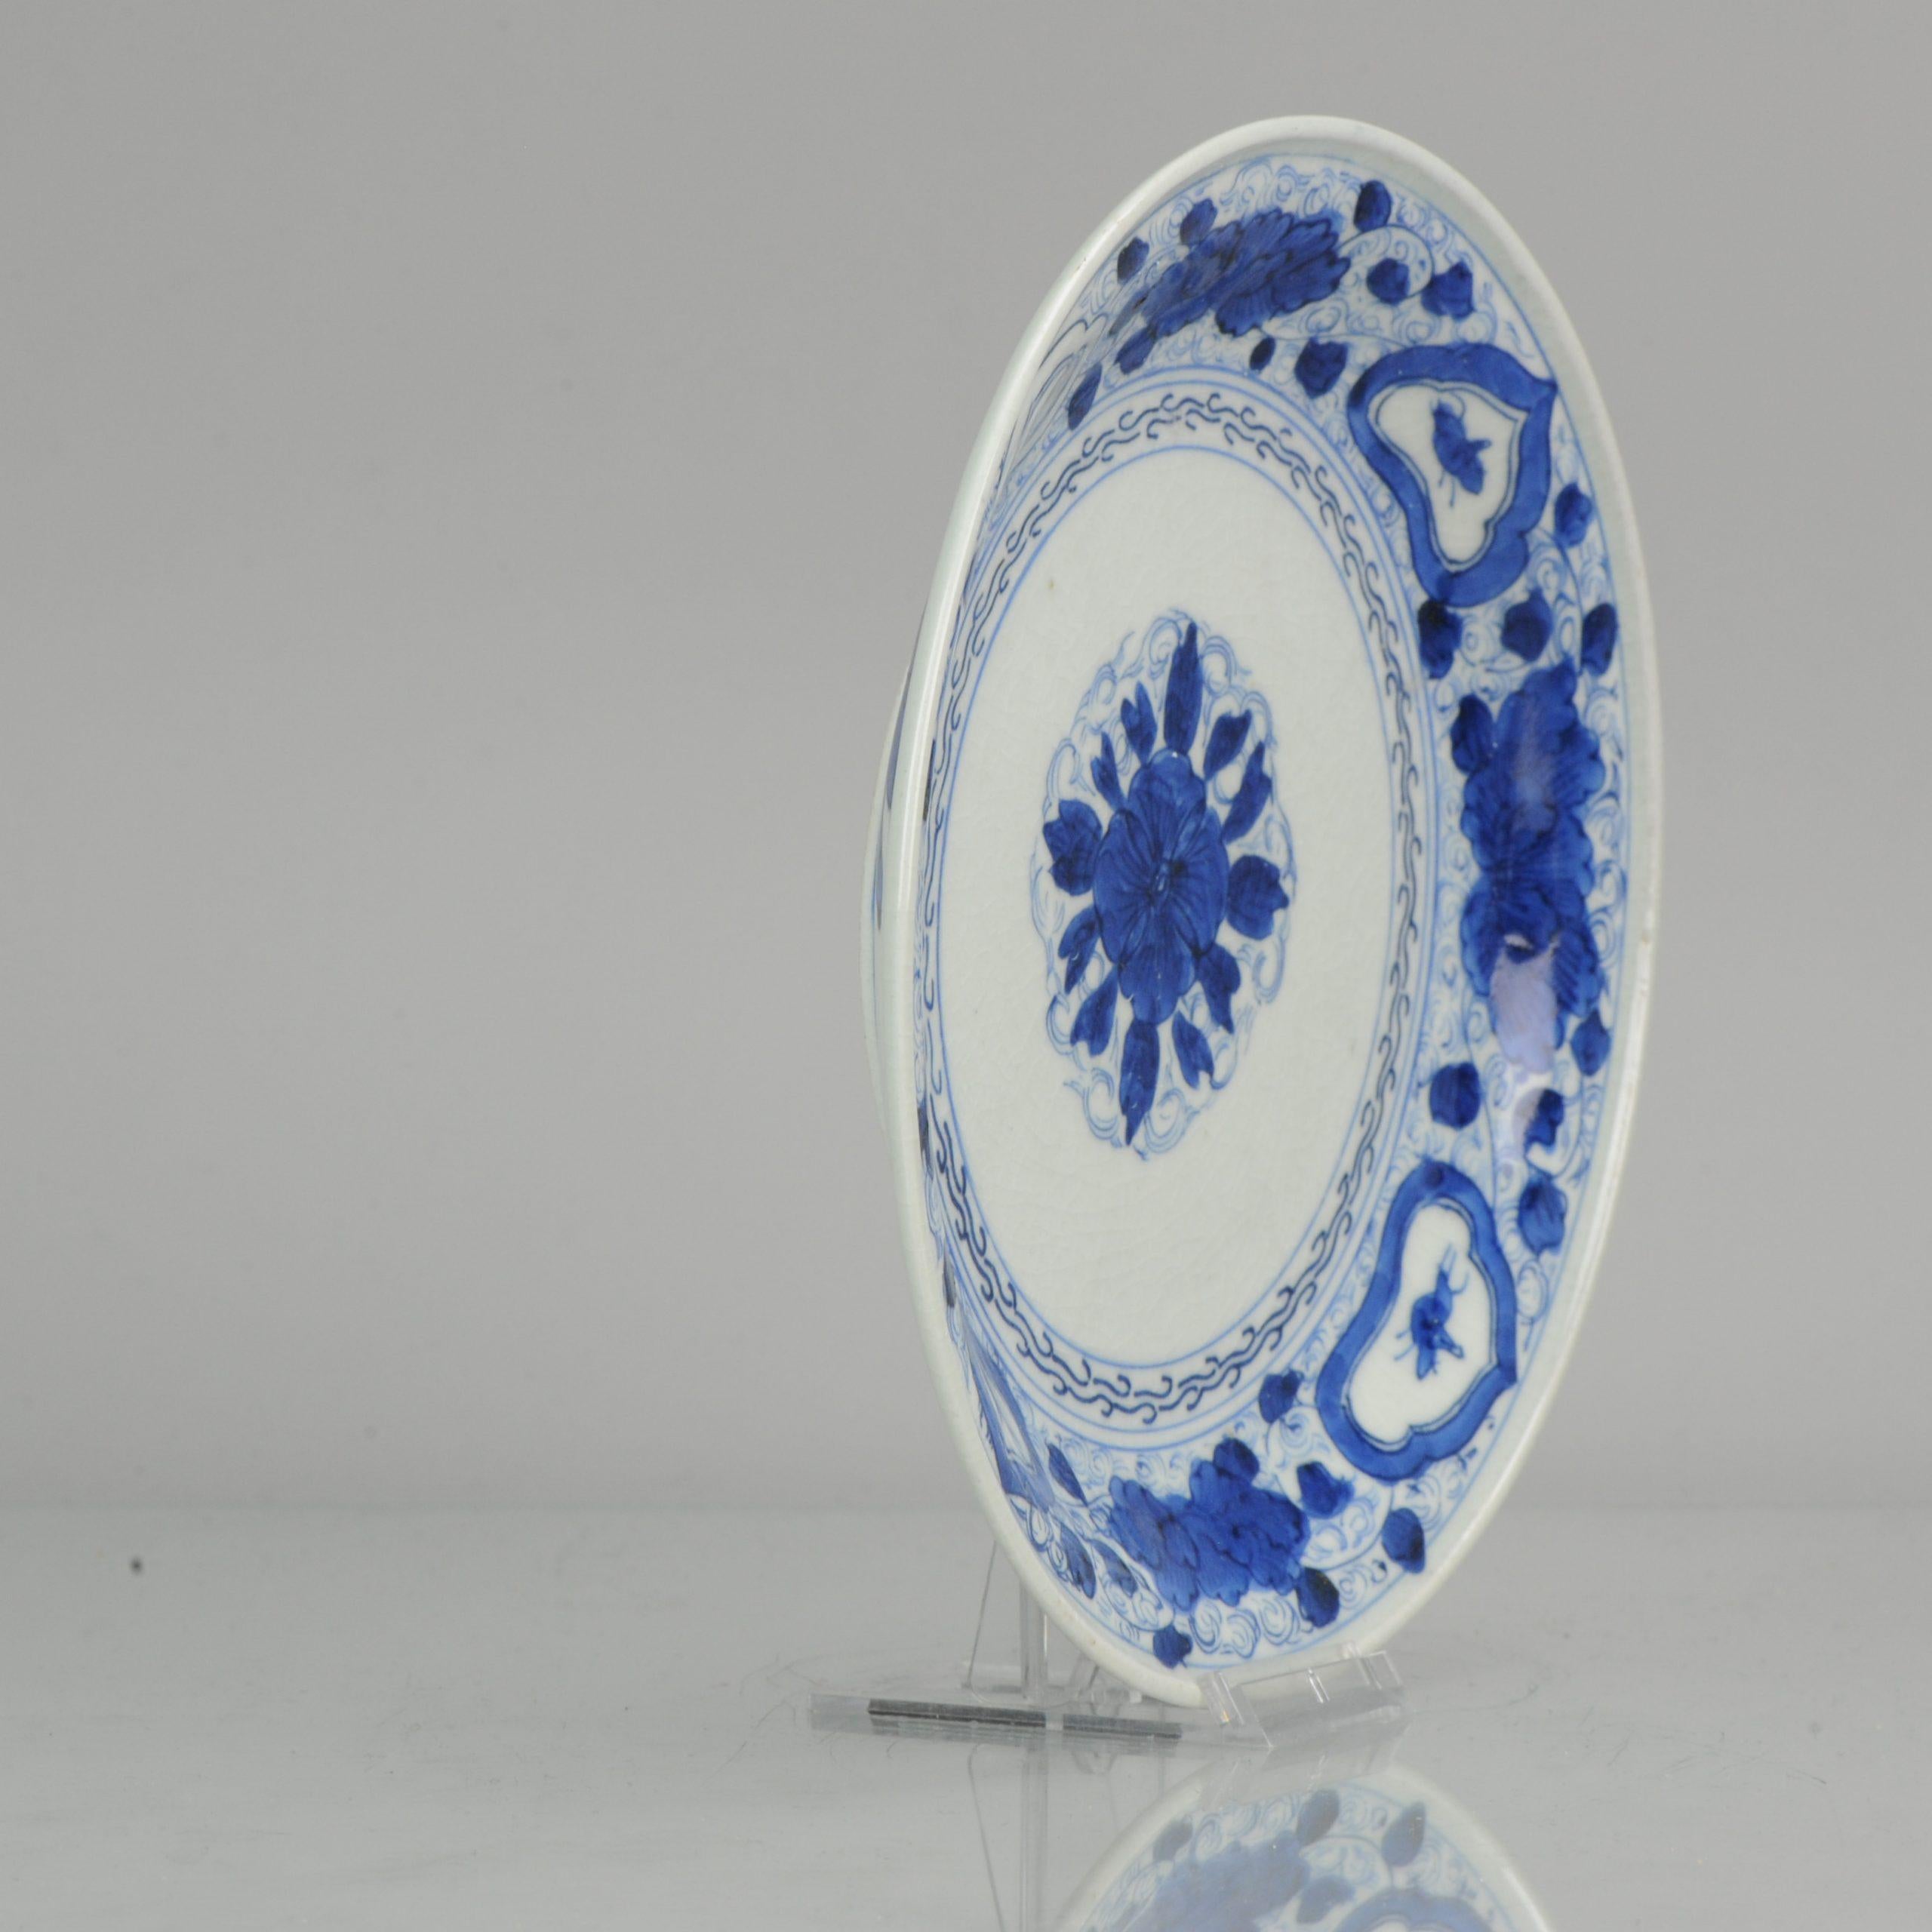 A very nicely made dish with a beautiful decoration.

Additional information:
Material: Porcelain & Pottery
Type: Plates
Region of Origin: Japan
Period: 19th century, 18th century
Age: Pre-1800
Condition: Craquele
Dimension: Ø 21.4 cm
